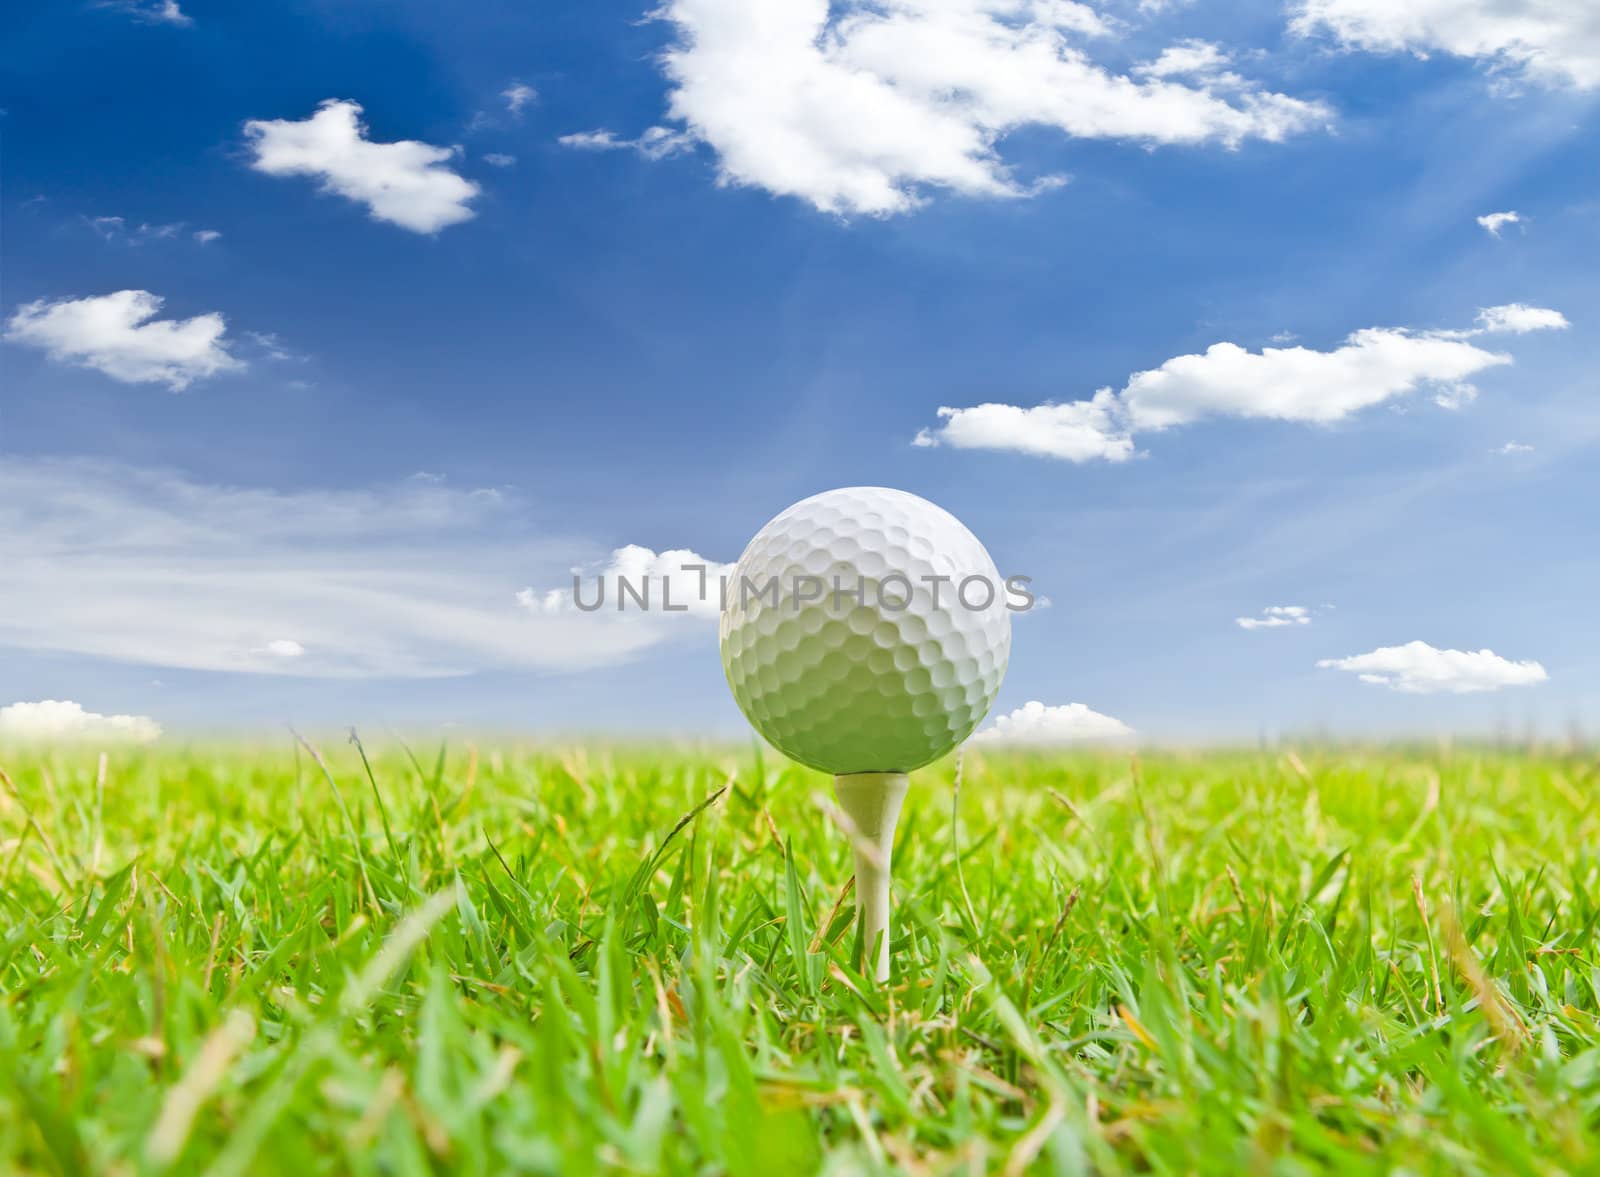 golf ball and tee grass by tungphoto